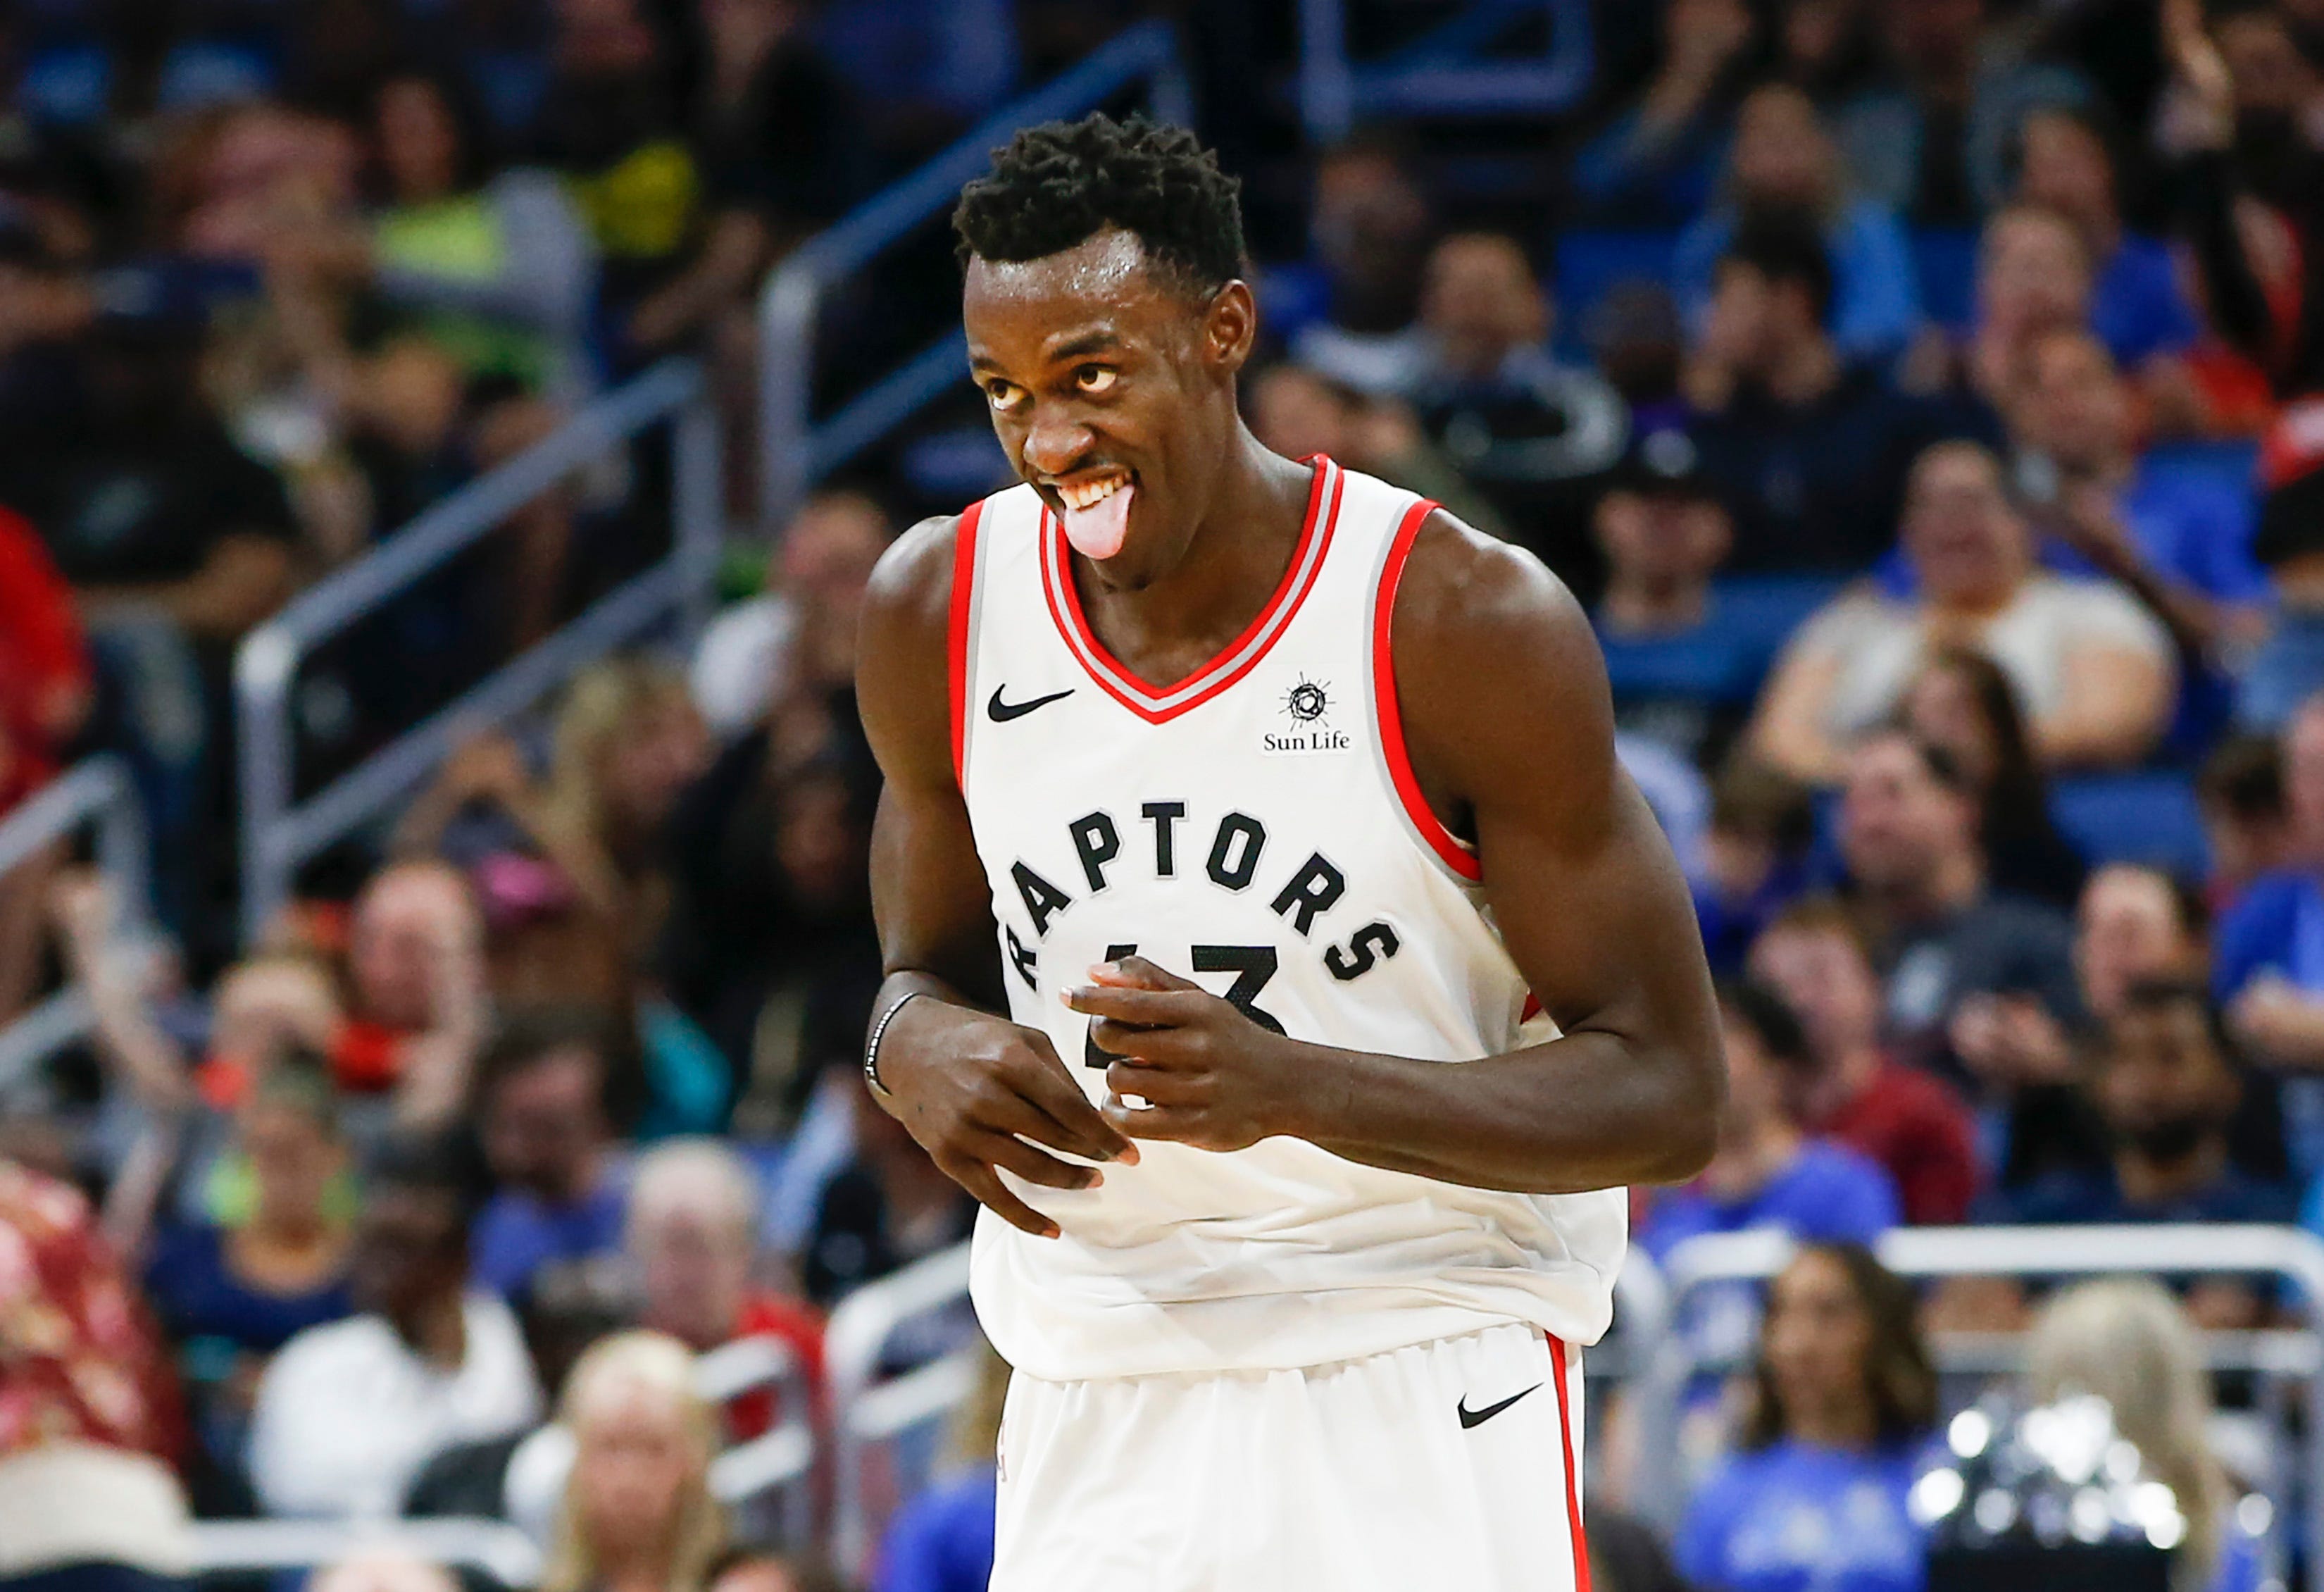 Toronto Raptors forward Pascal Siakam makes a face after making a 3 point-shot during the second half against the Orlando Magic at Amway Center in Orlando.